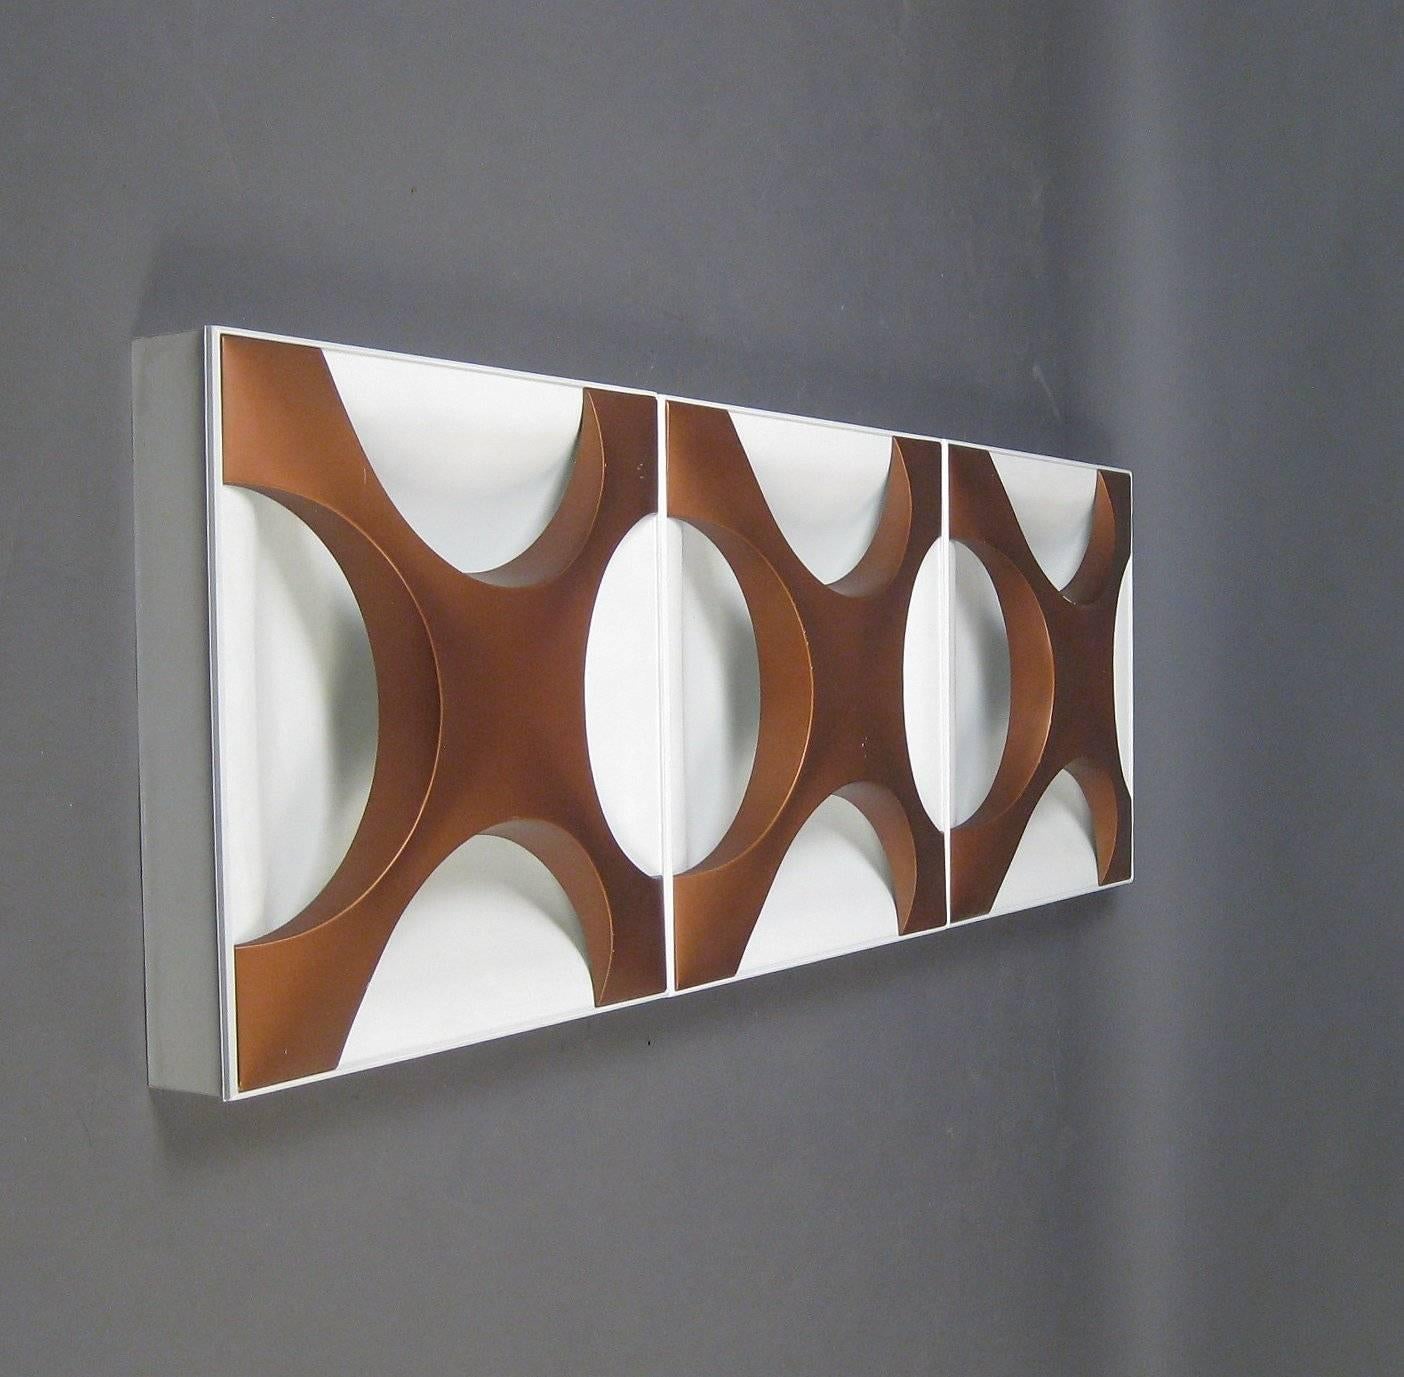 Ceiling or wall light model Oyster, German design by Dieter Witte & Rolf Krüger for staff. Design, circa 1968. Construction made of white lacquered steel sheet, covers copper-lacquered, equipped with four burners each. Partially labelled with